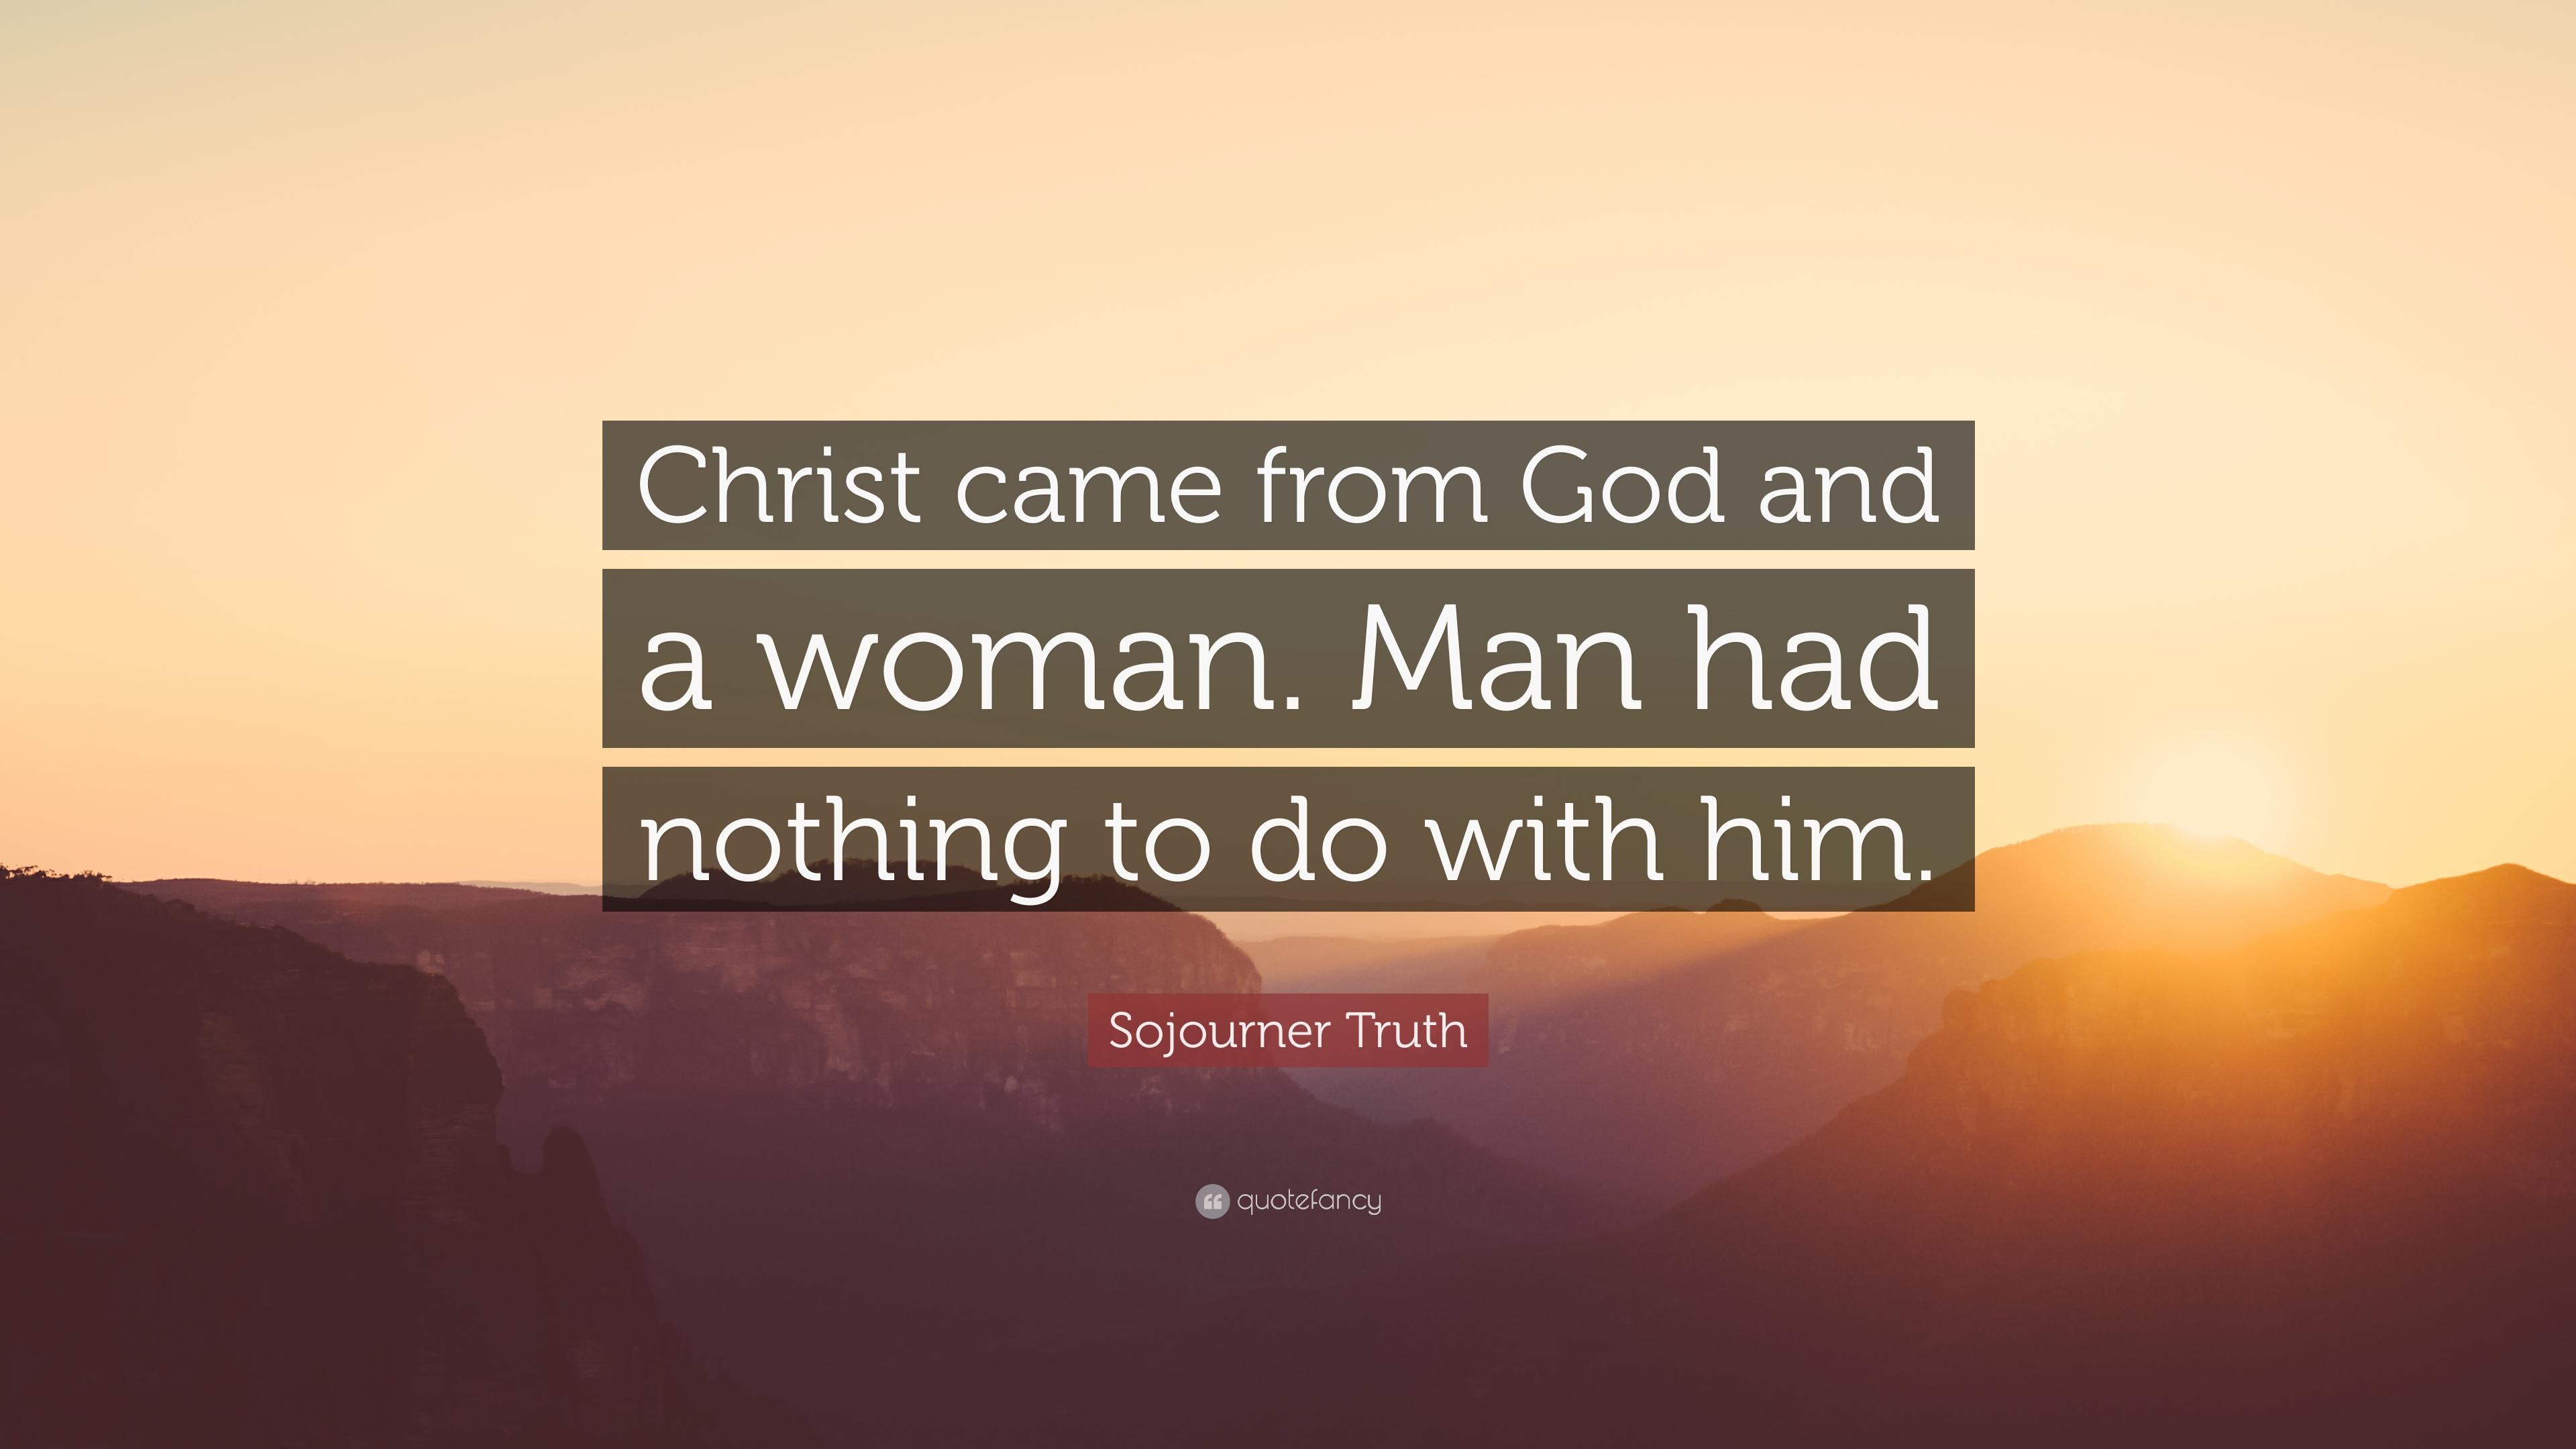 Sojourner Truth Quote: “Christ came from God and a woman. Man had